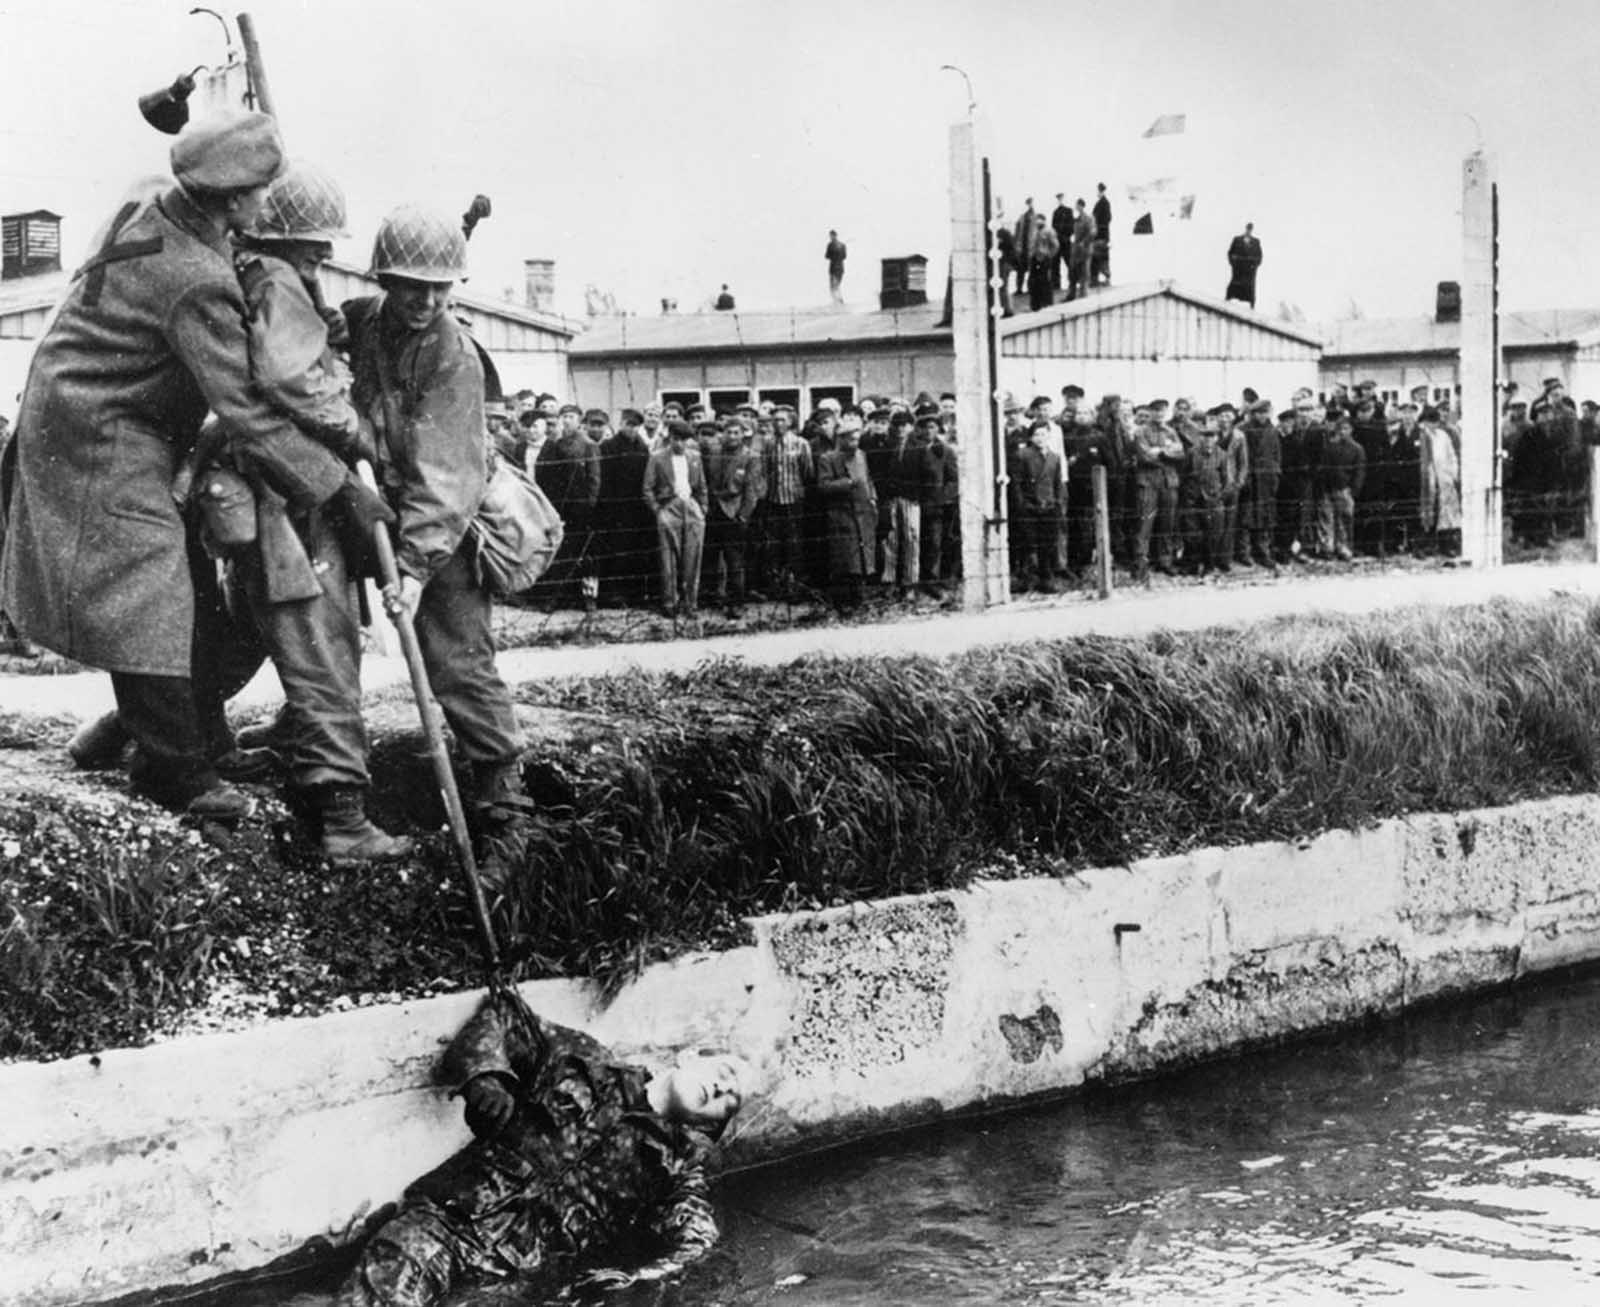 When American troops liberated prisoners in the Dachau concentration camp, Germany, in 1945, many German SS guards were killed by the prisoners who then threw their bodies into the moat surrounding the camp.